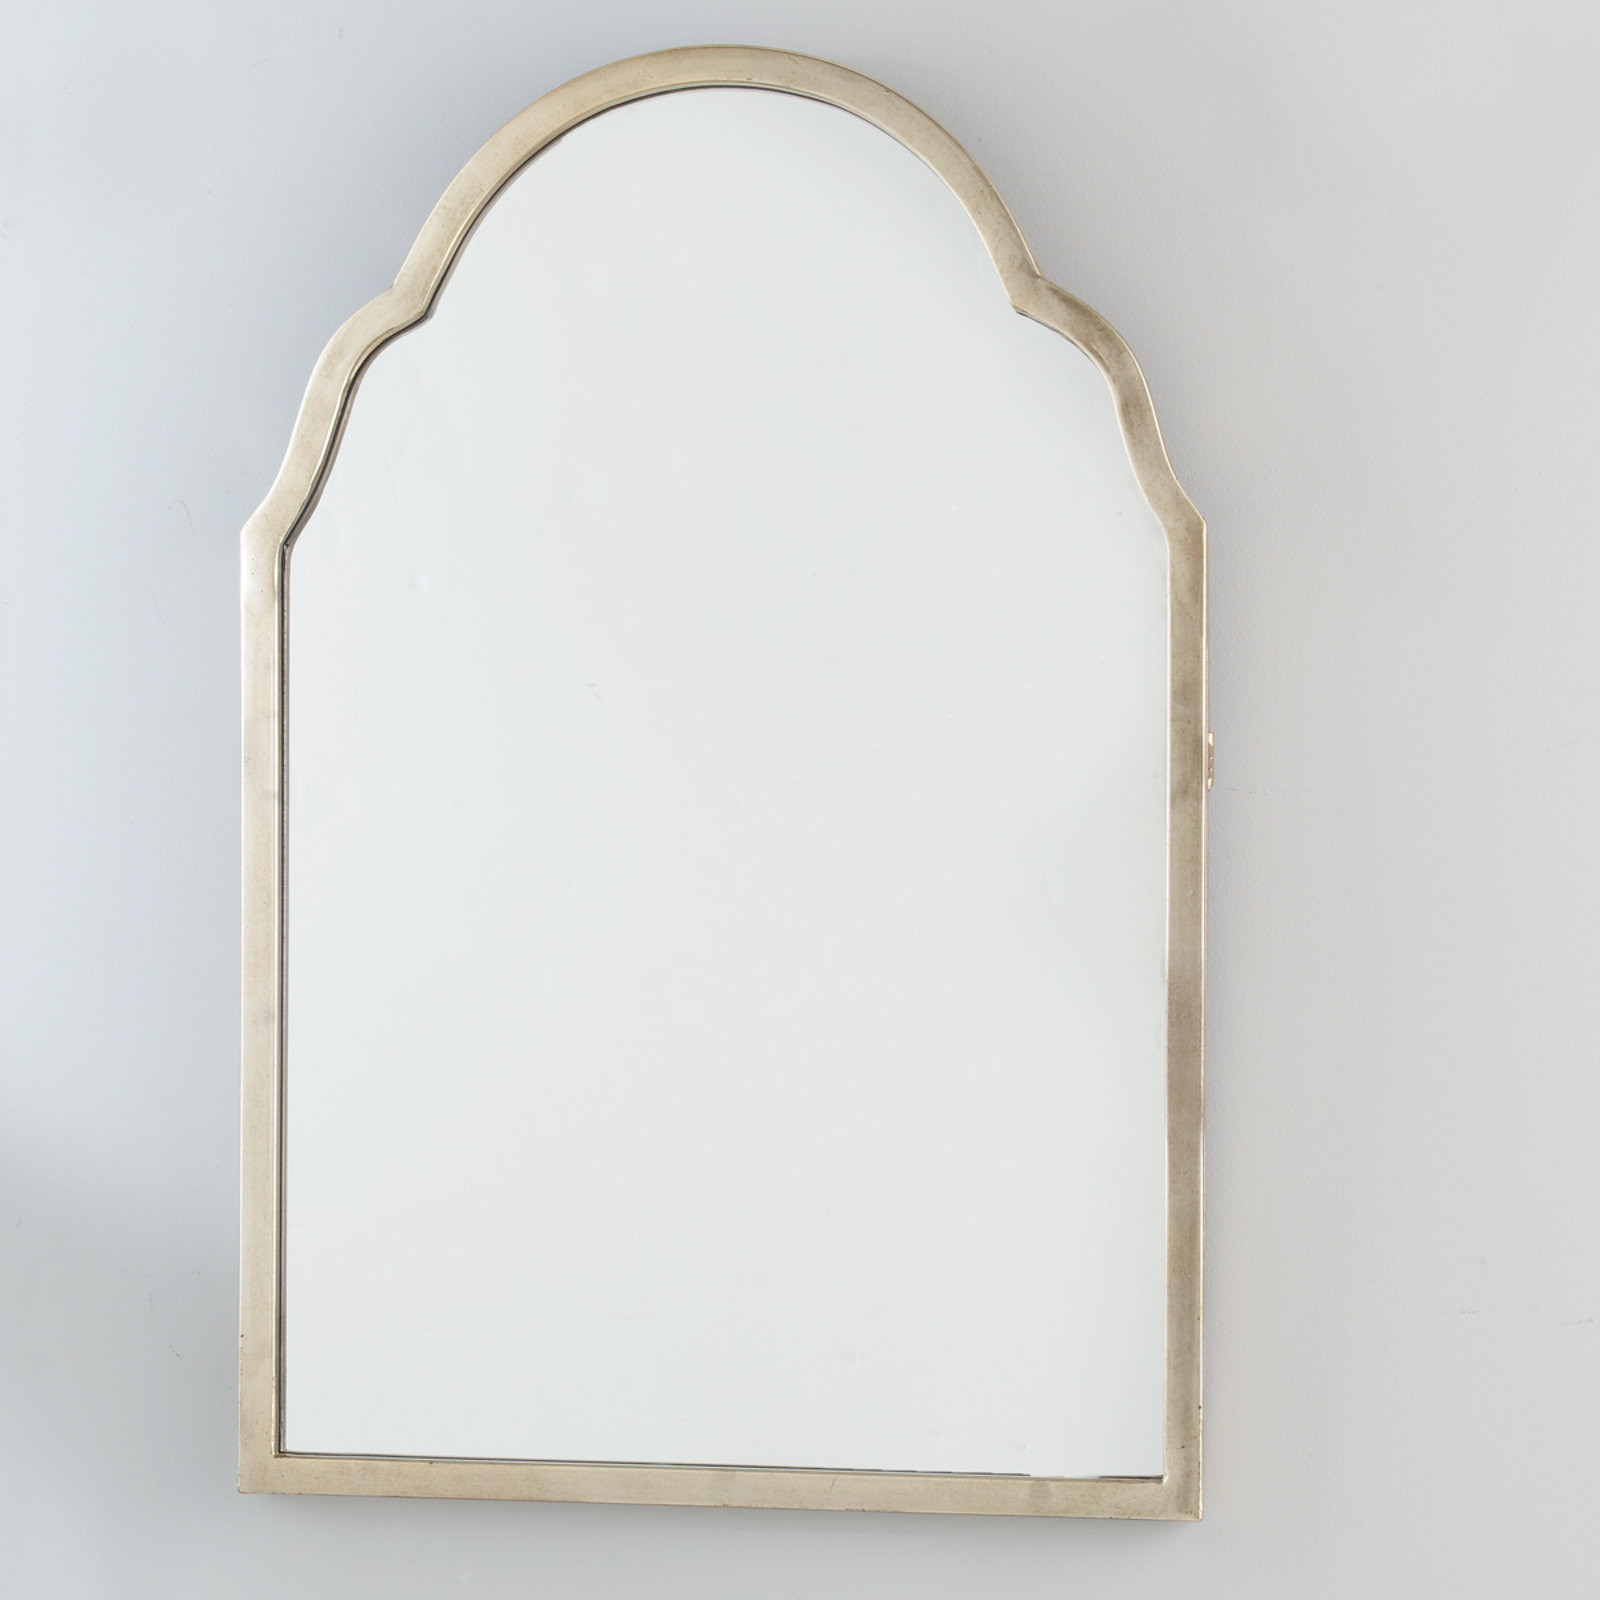 Arched Bathroom Mirror
 Silver Arched Frame Mirror Shades of Light